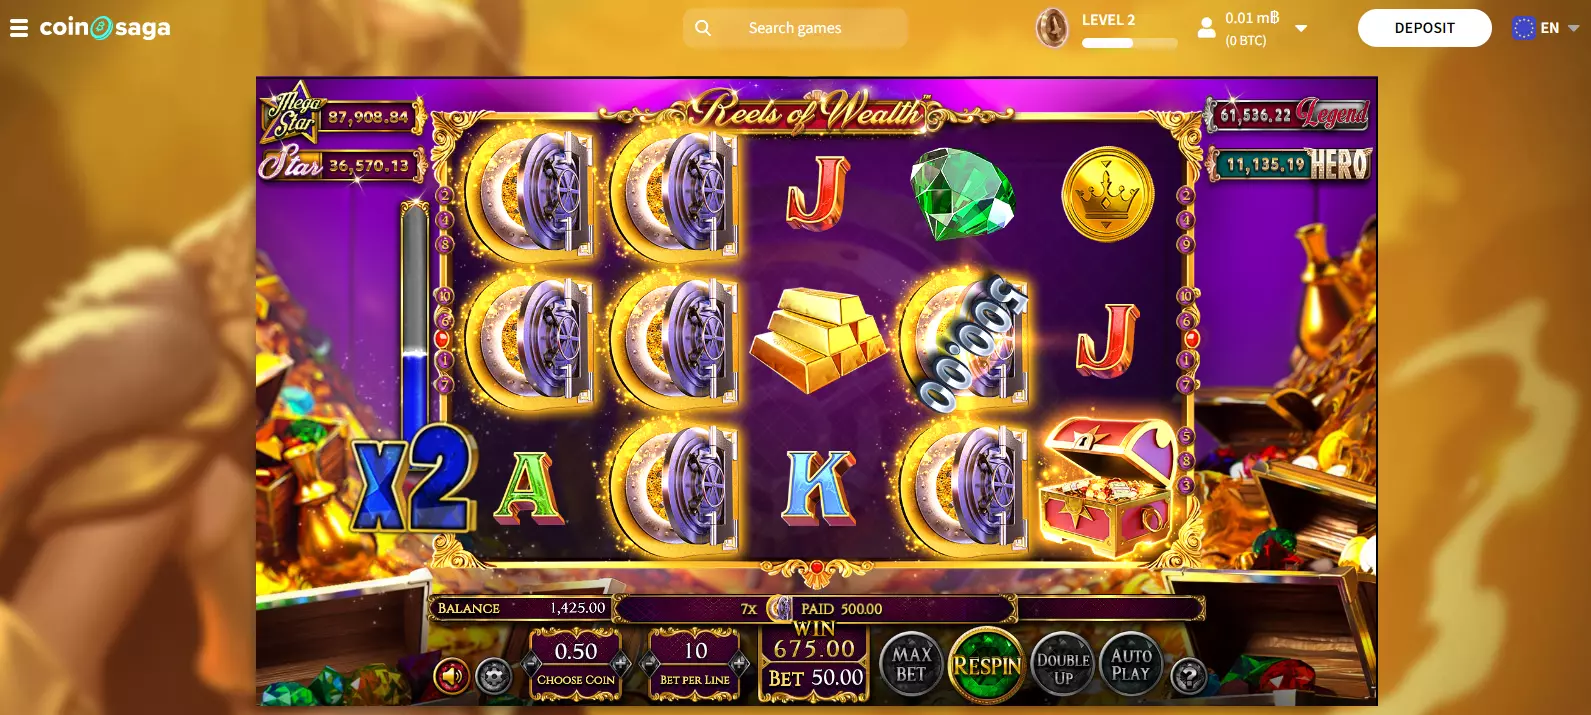 Reels of Wealth Slot Review